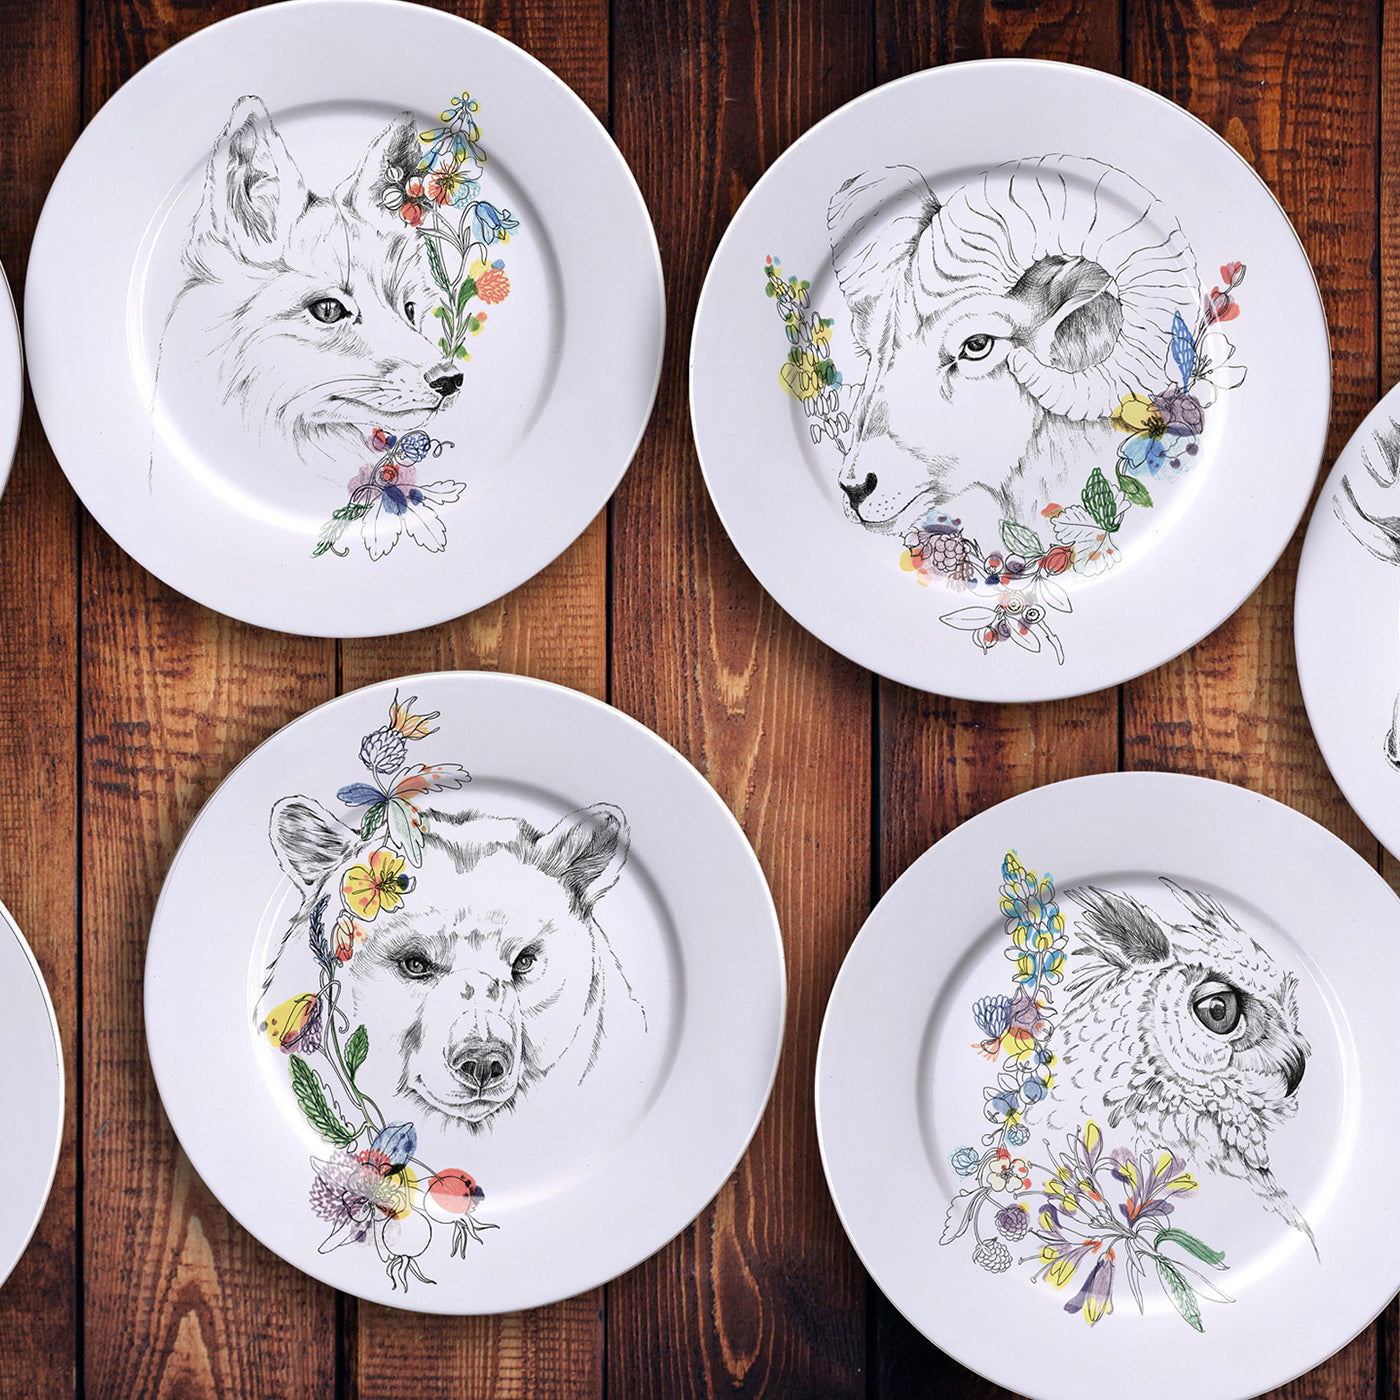 An Ode To The Woods Black Bear Dinner Plate - Alternative view 3